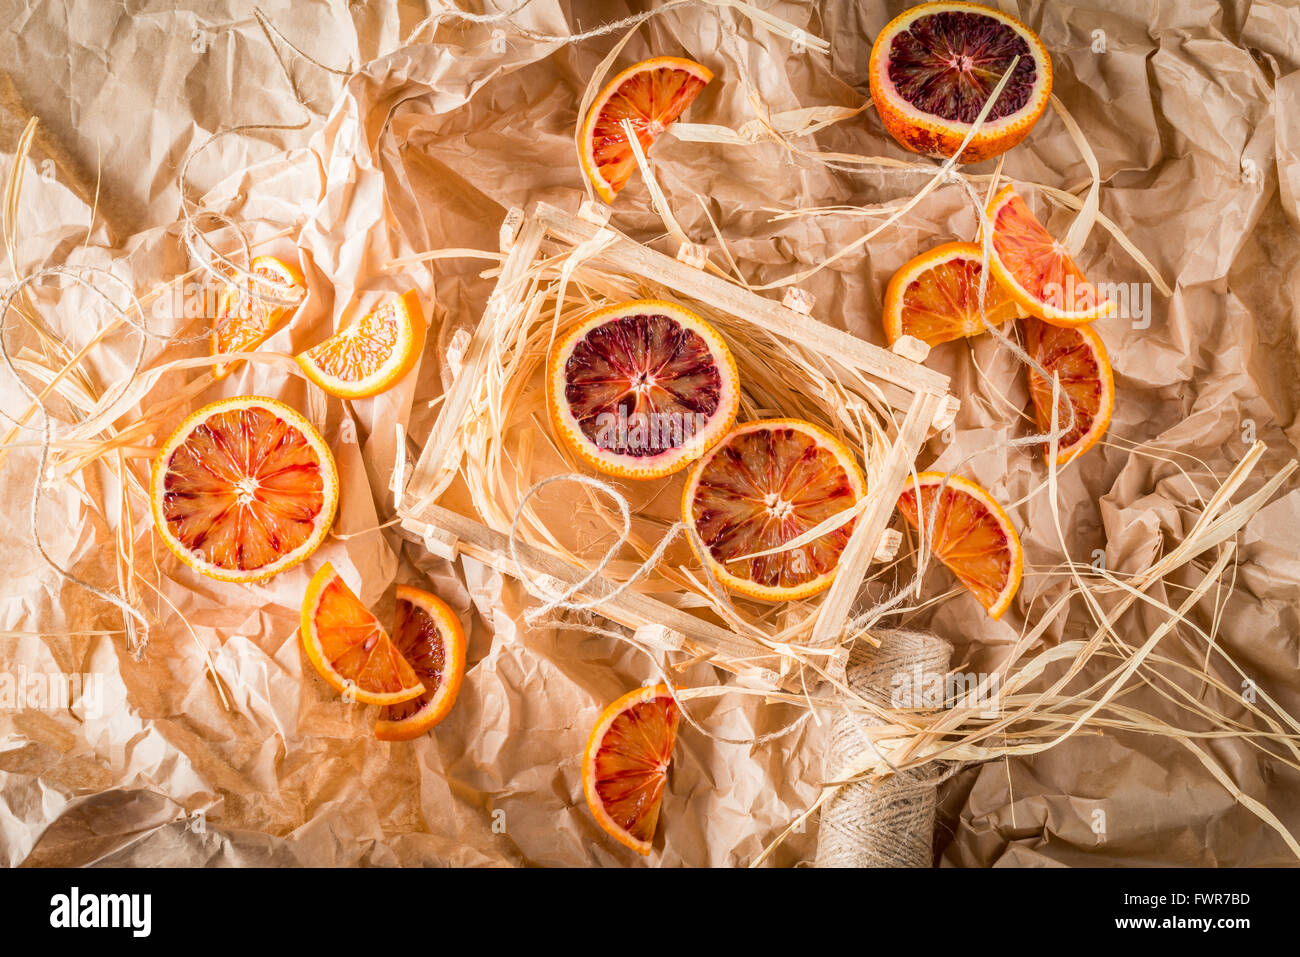 Blood oranges on wrapping paper with string Stock Photo